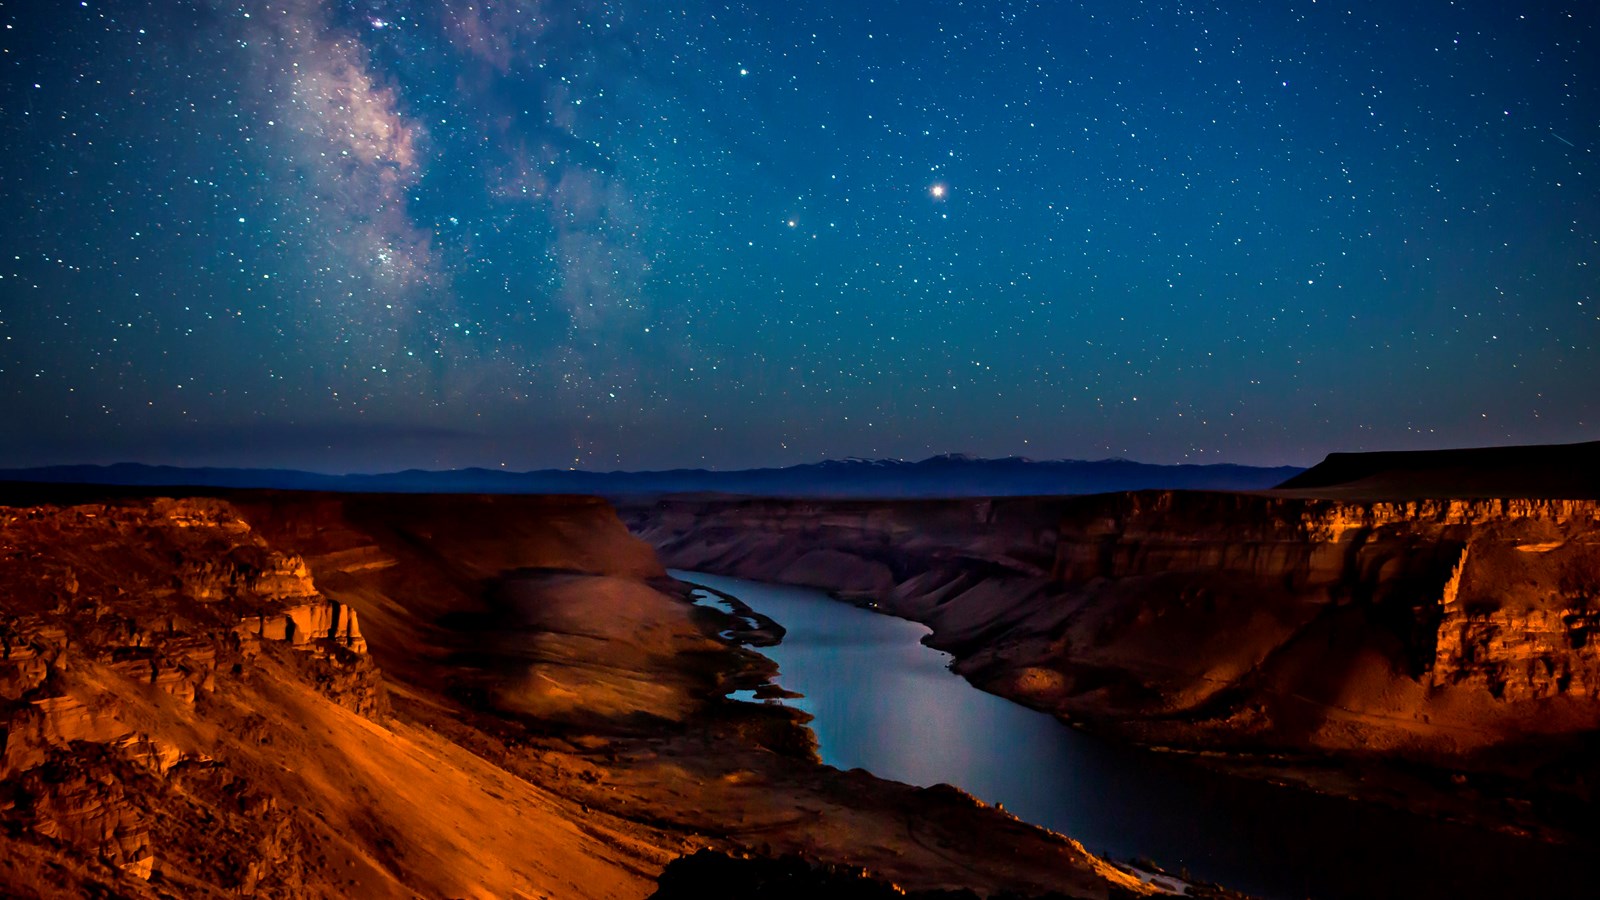 Photograph of Snake River at night, with stars visible above. The river is going through steep canyo